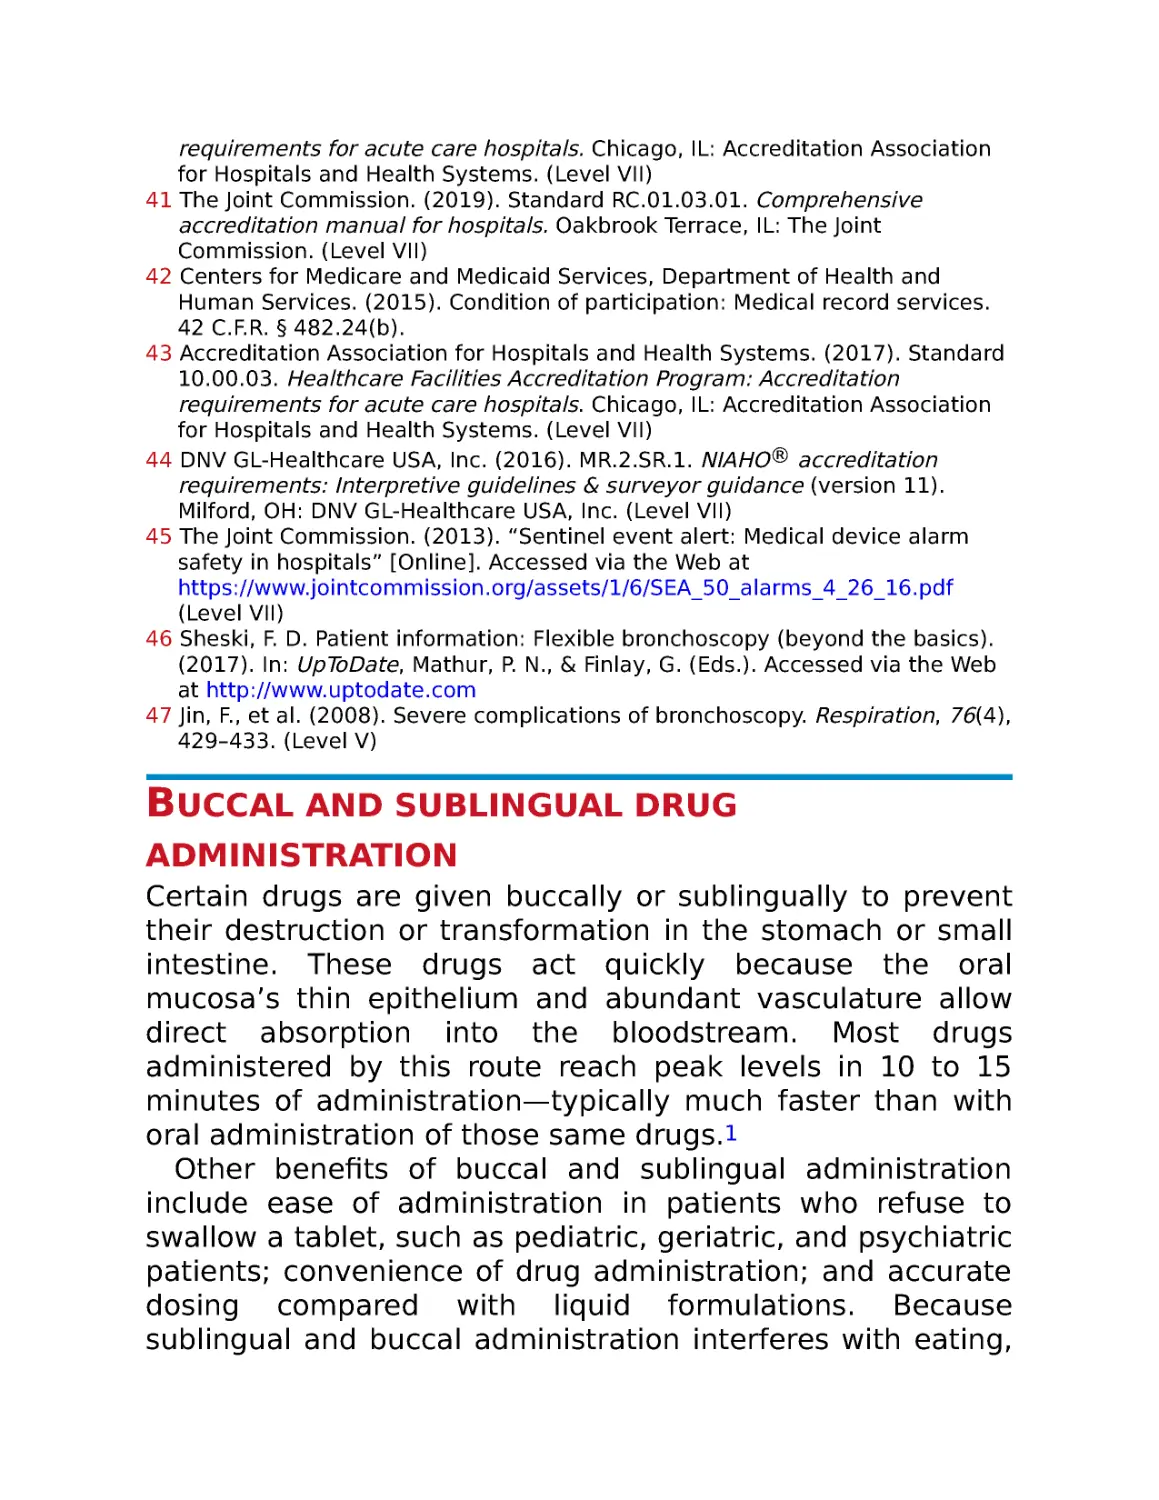 Buccal and sublingual drug administration